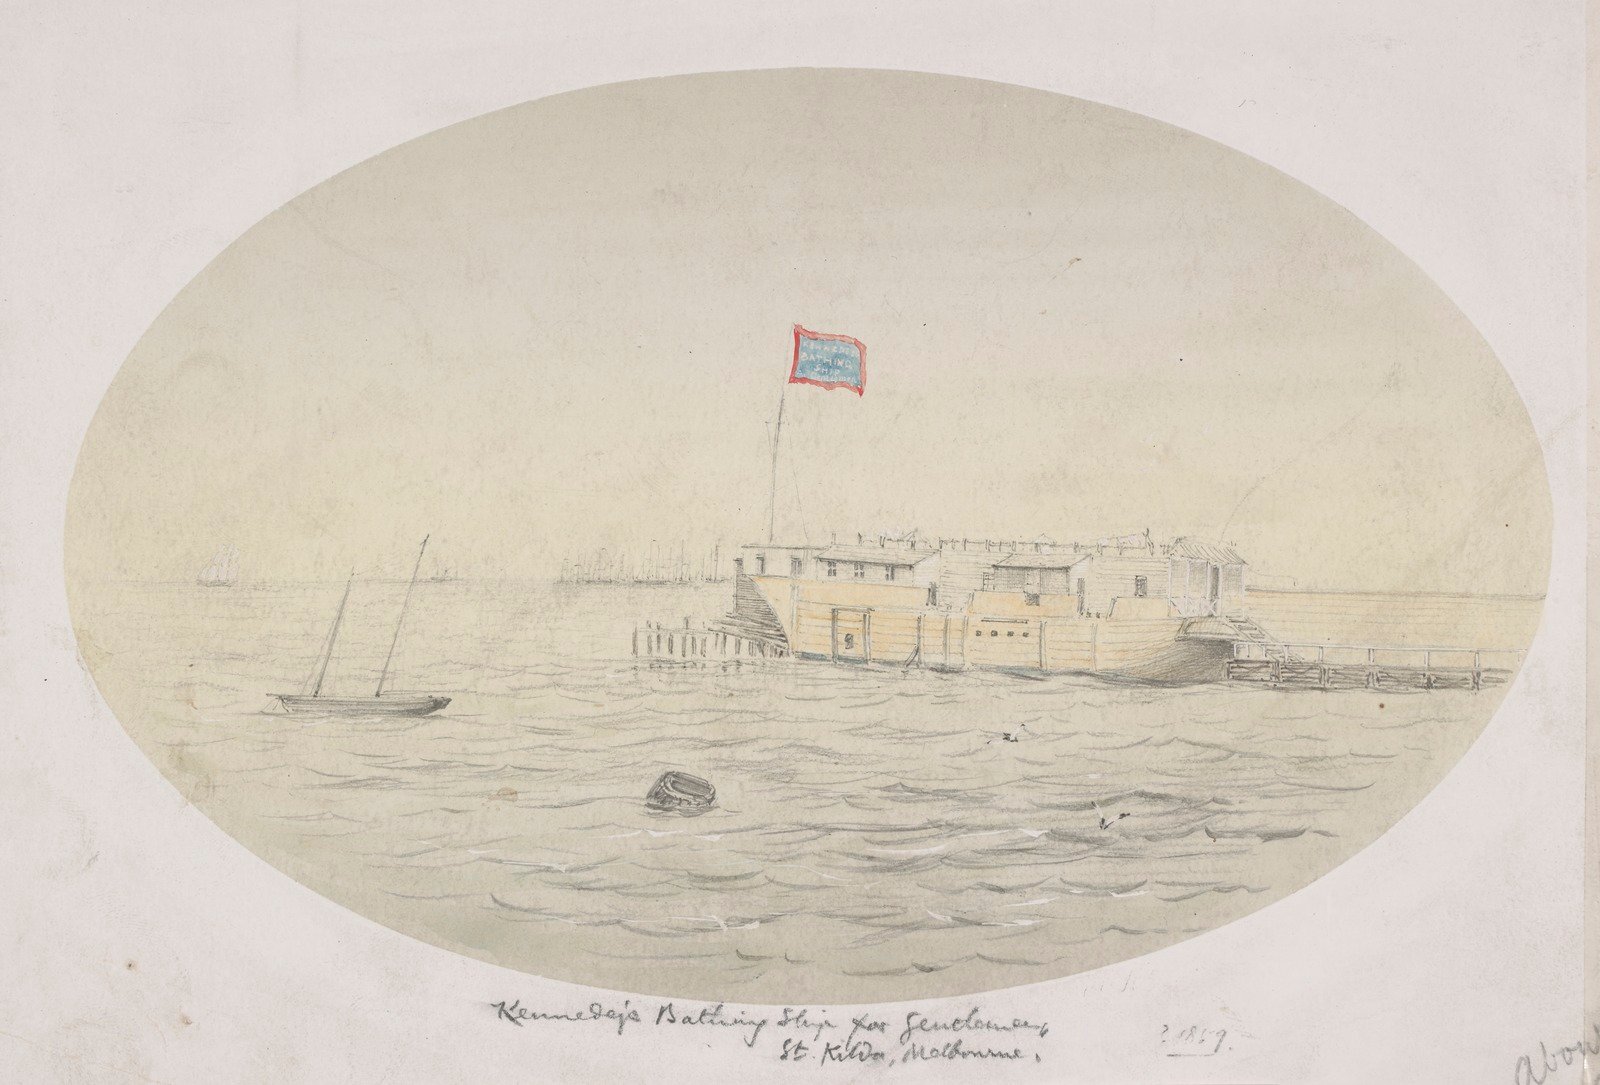 Watercolour painting of Captain Kenney's bathing ship anchored by St Kilda pier 